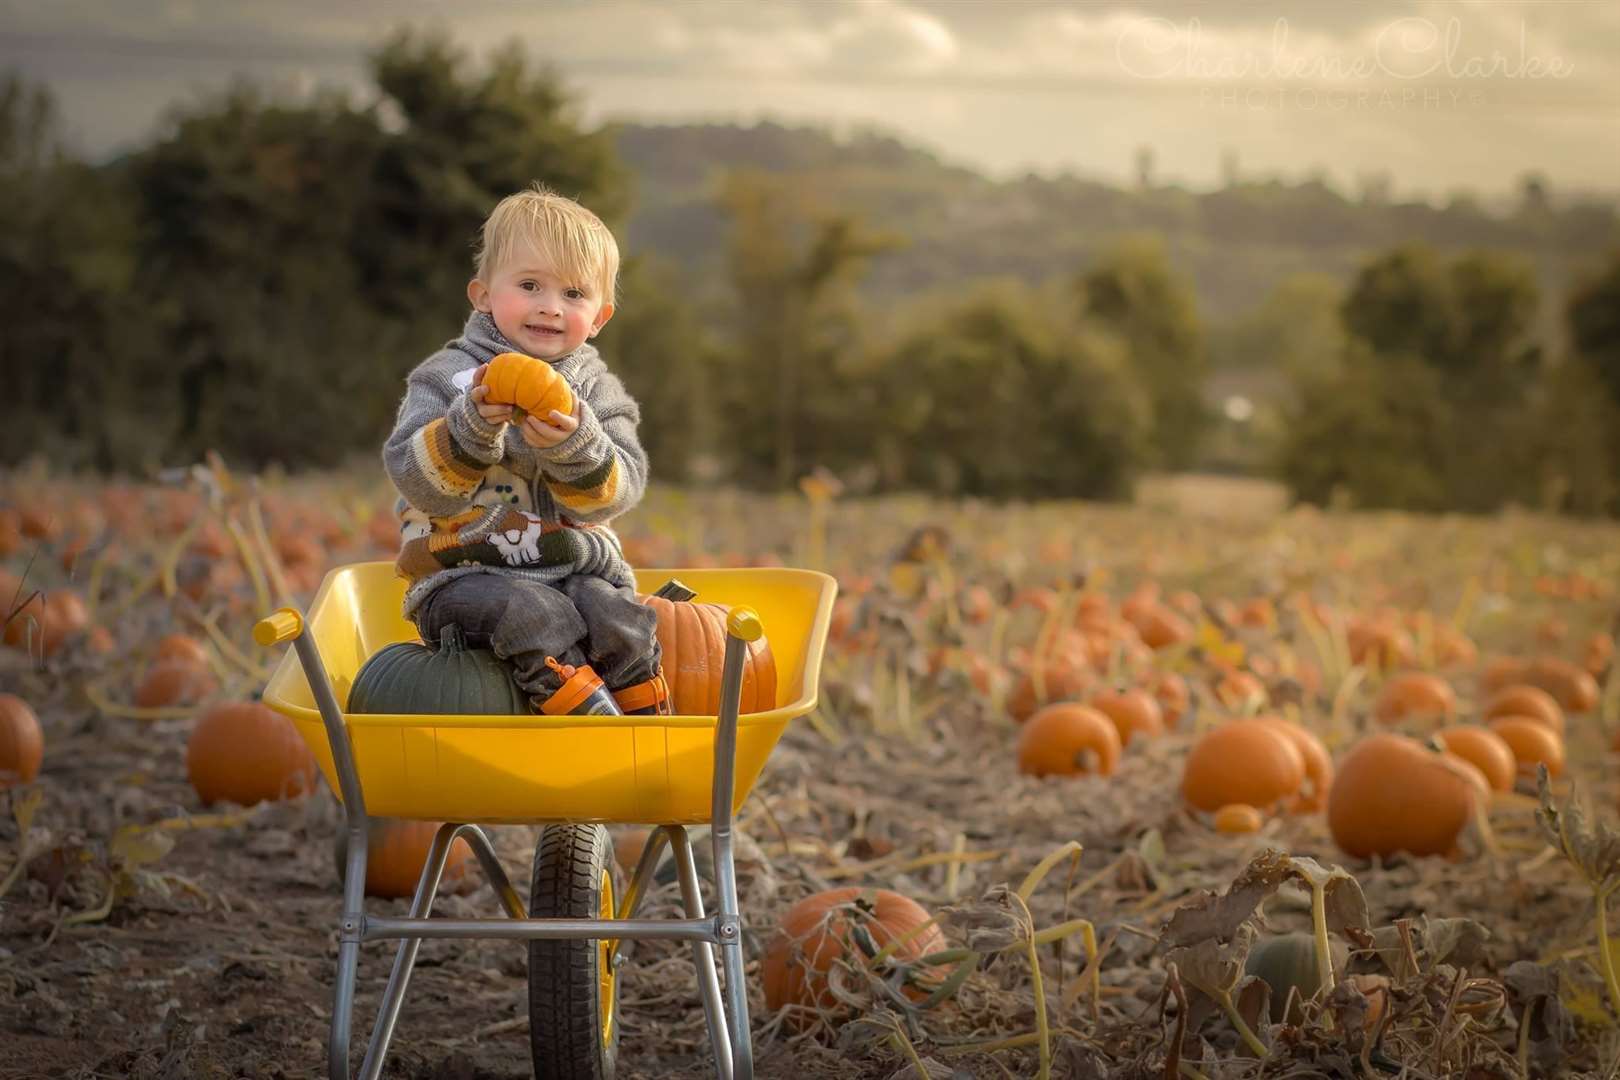 Families will be able to pick the spooky orange squashes at Pumpkin Moon